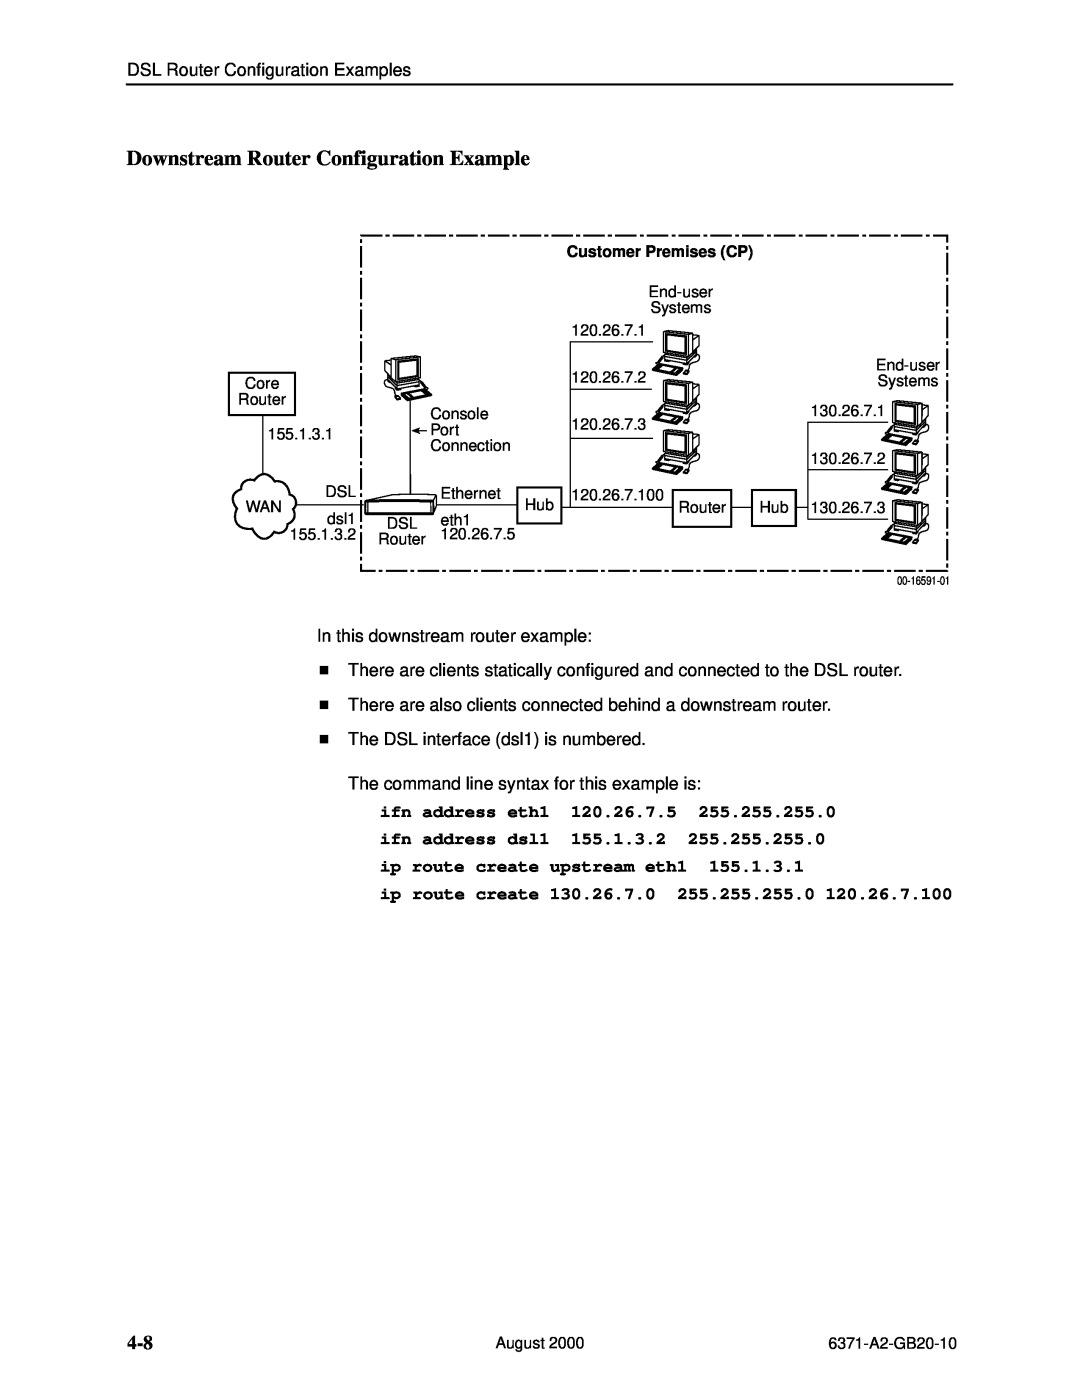 Paradyne Routers manual Downstream Router Configuration Example, ip route create 130.26.7.0 255.255.255.0 